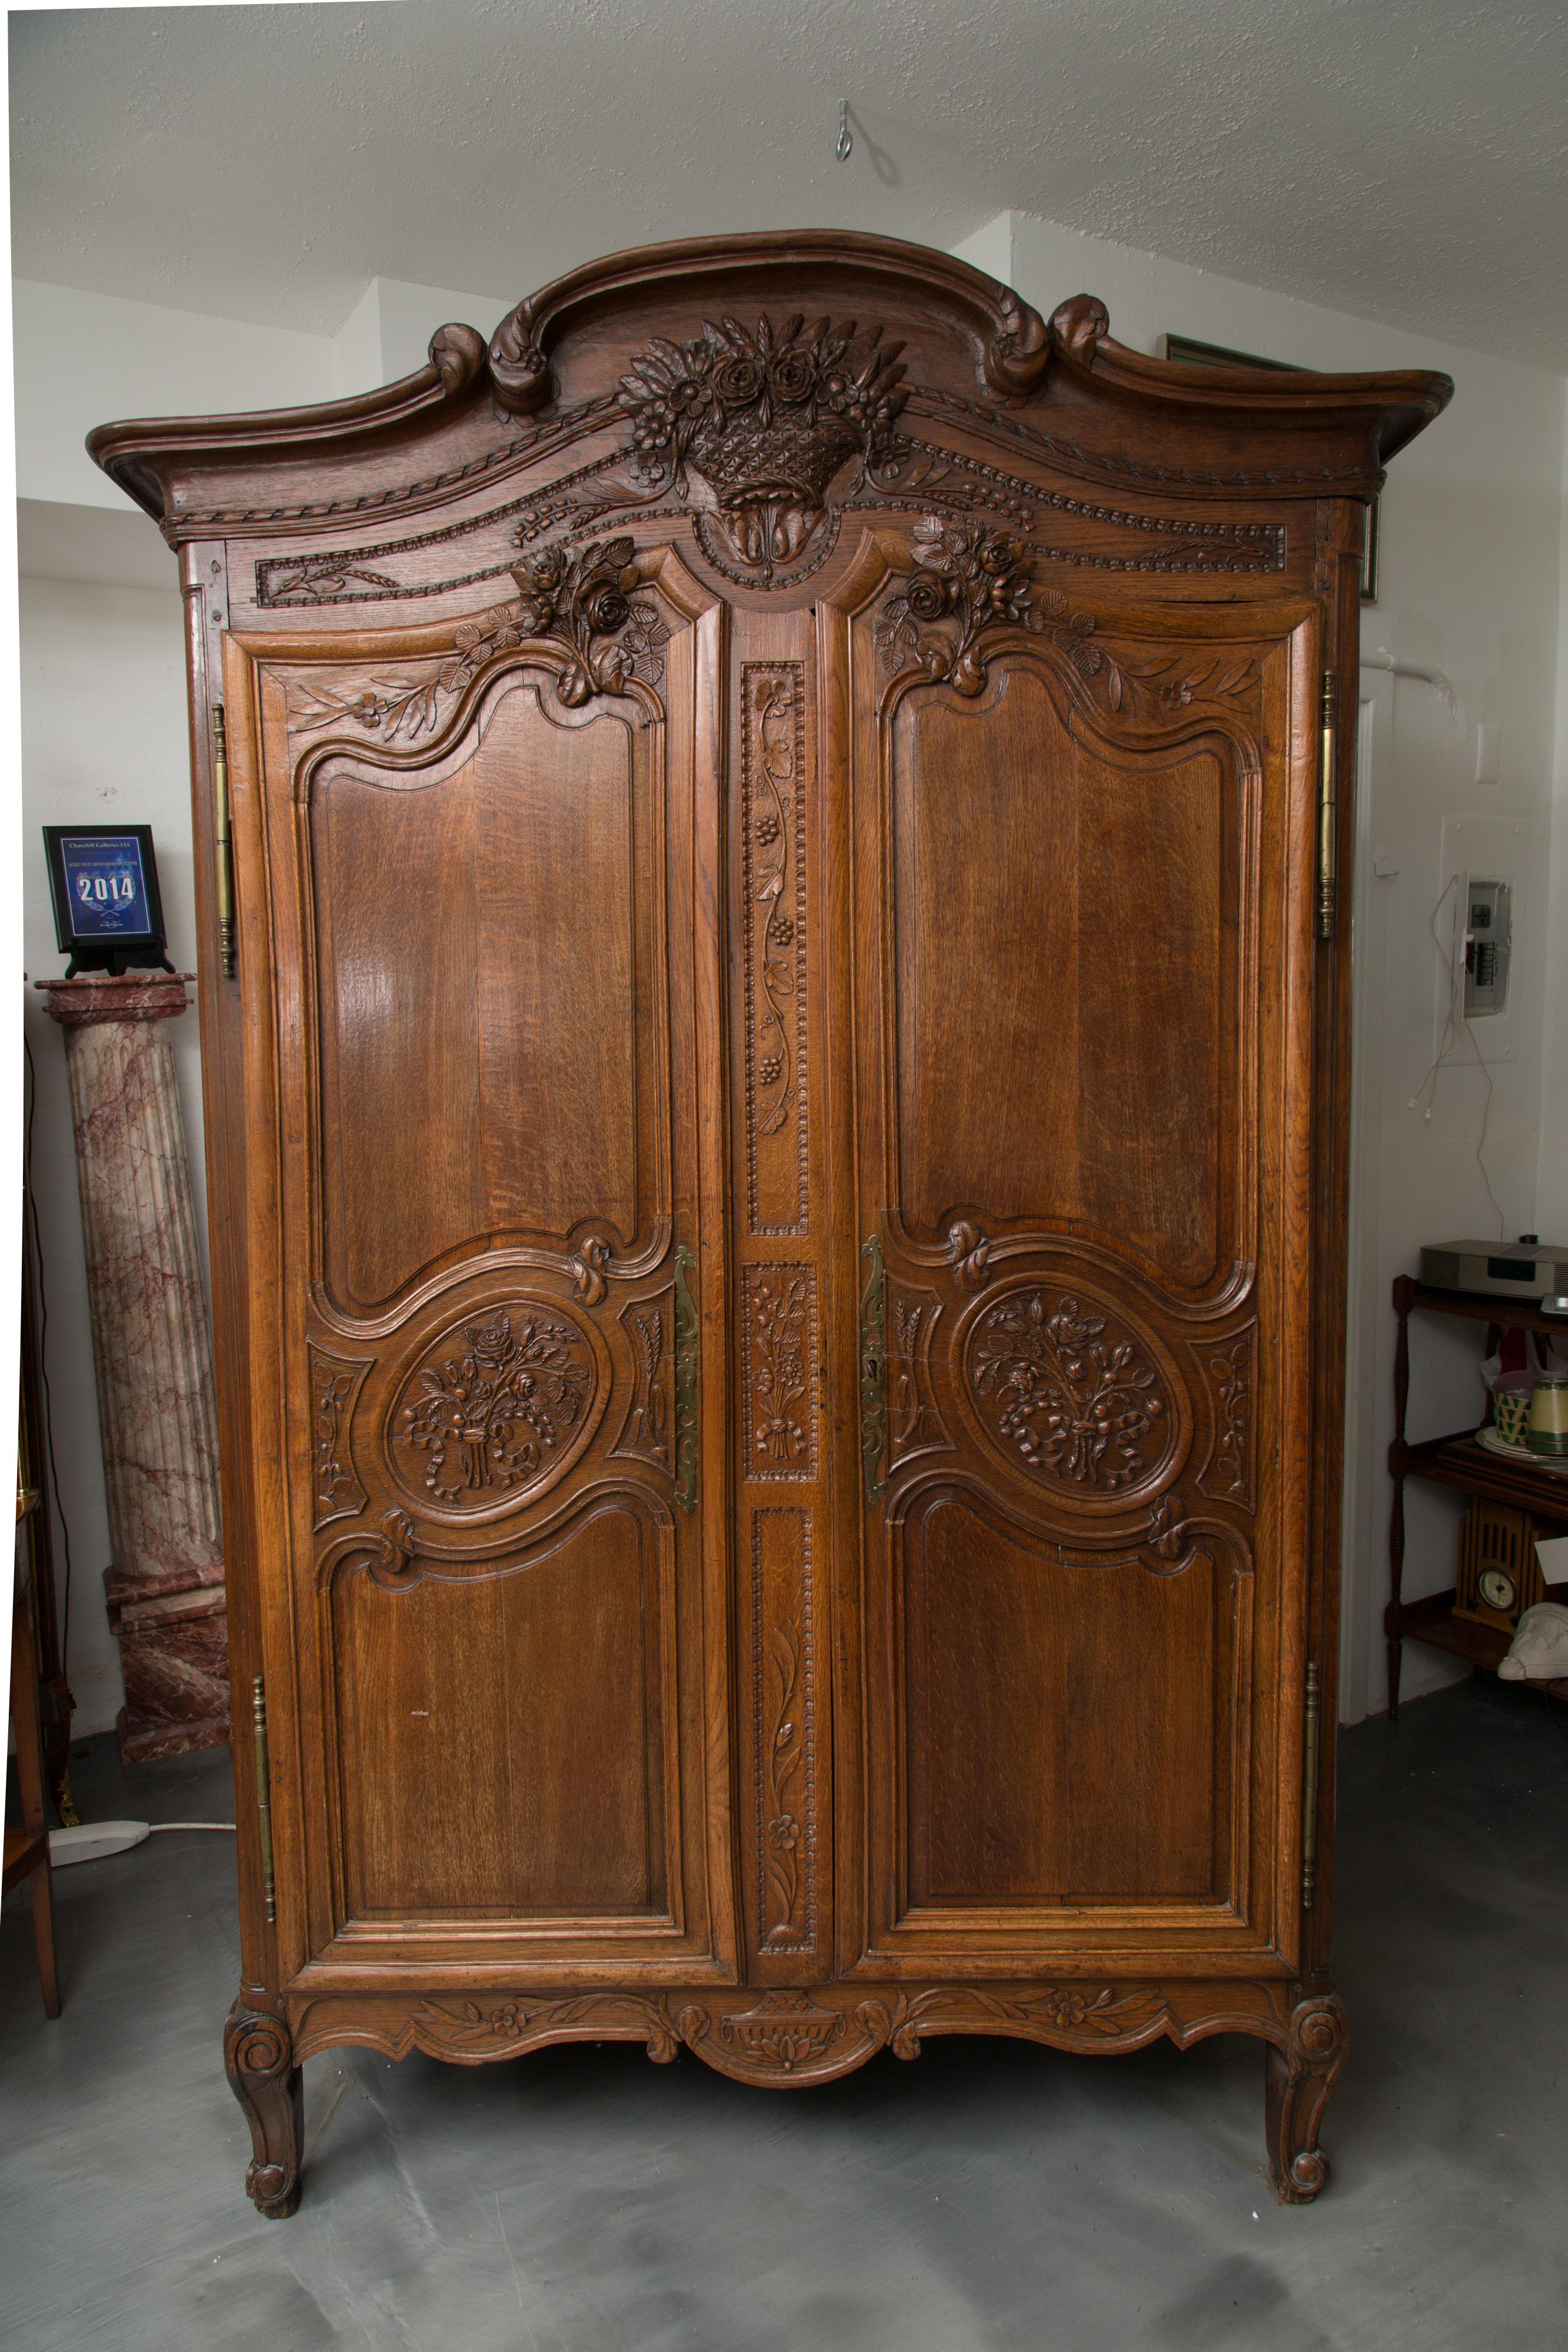 This is a stunning example of a Louis XV walnut Normandy armoire. A cornice tops a with bold moulding arching in the centre over a traditional carved basket of flowers above two paneled doors accented with floral spray and supported by short